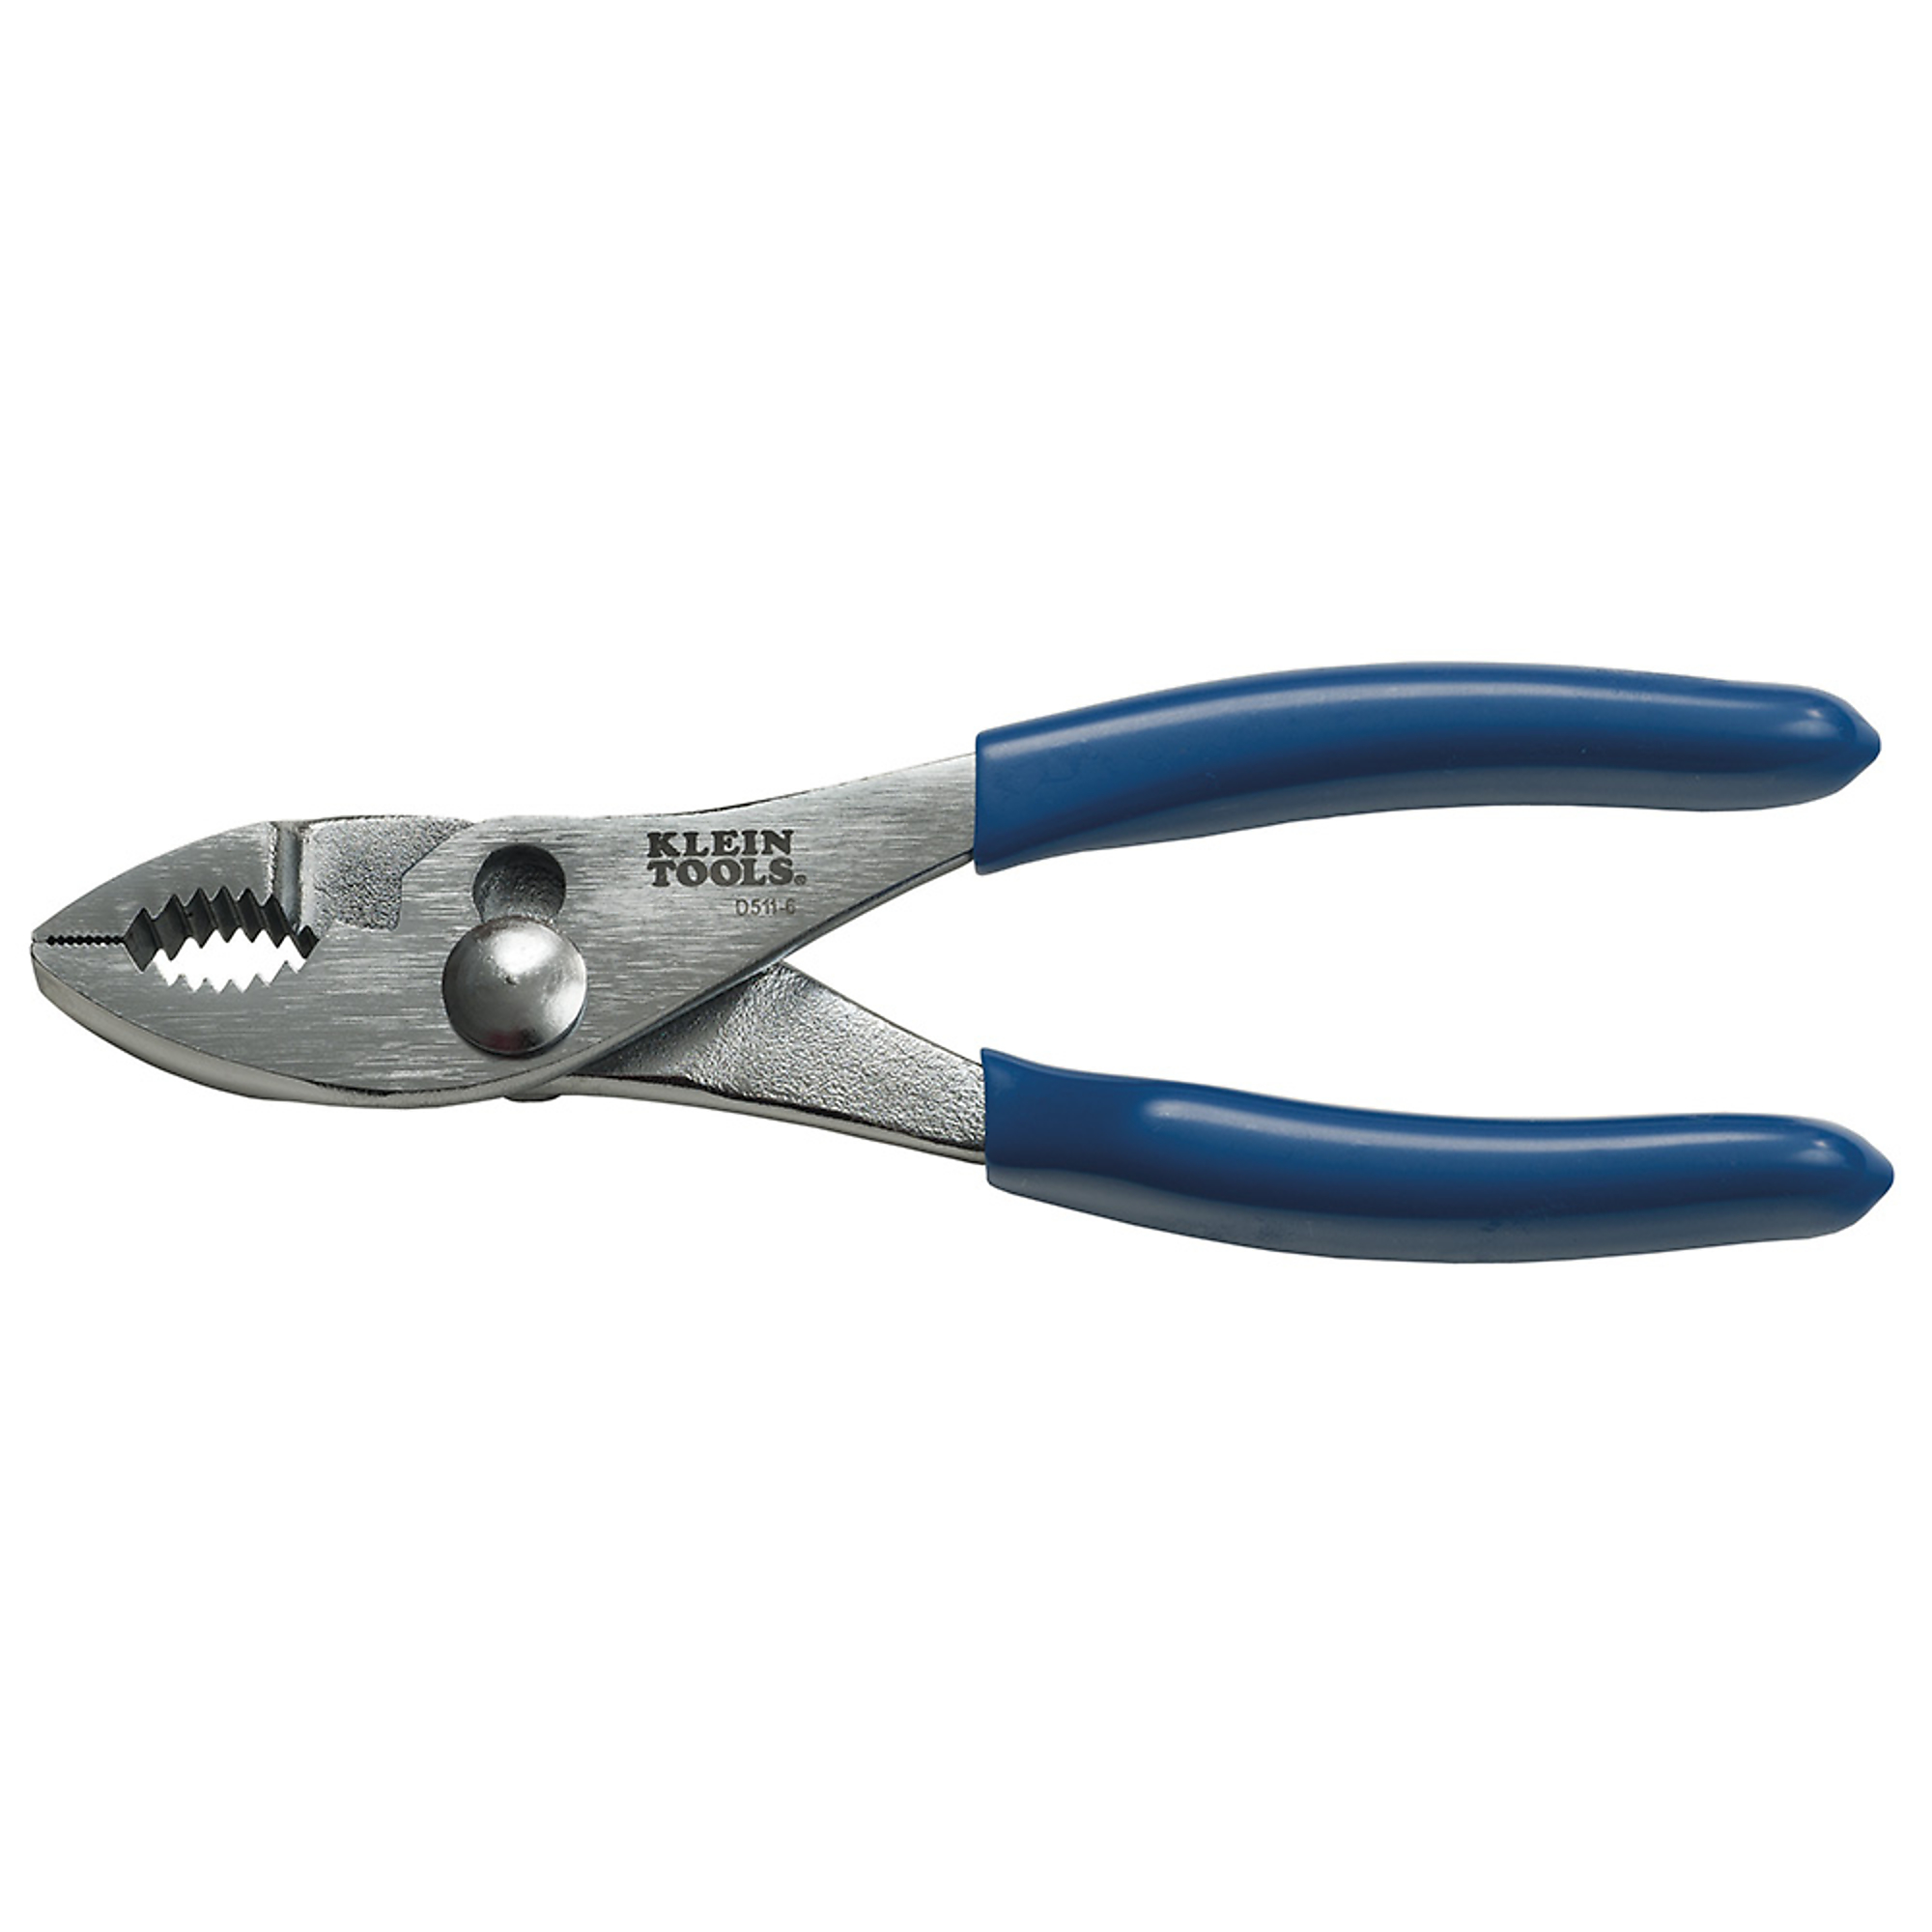 Klein Tools, 6Inch Slip-Joint Pliers, Pieces (qty.) 1 Material Steel, Jaw Capacity 2.63 in, Model D511-6